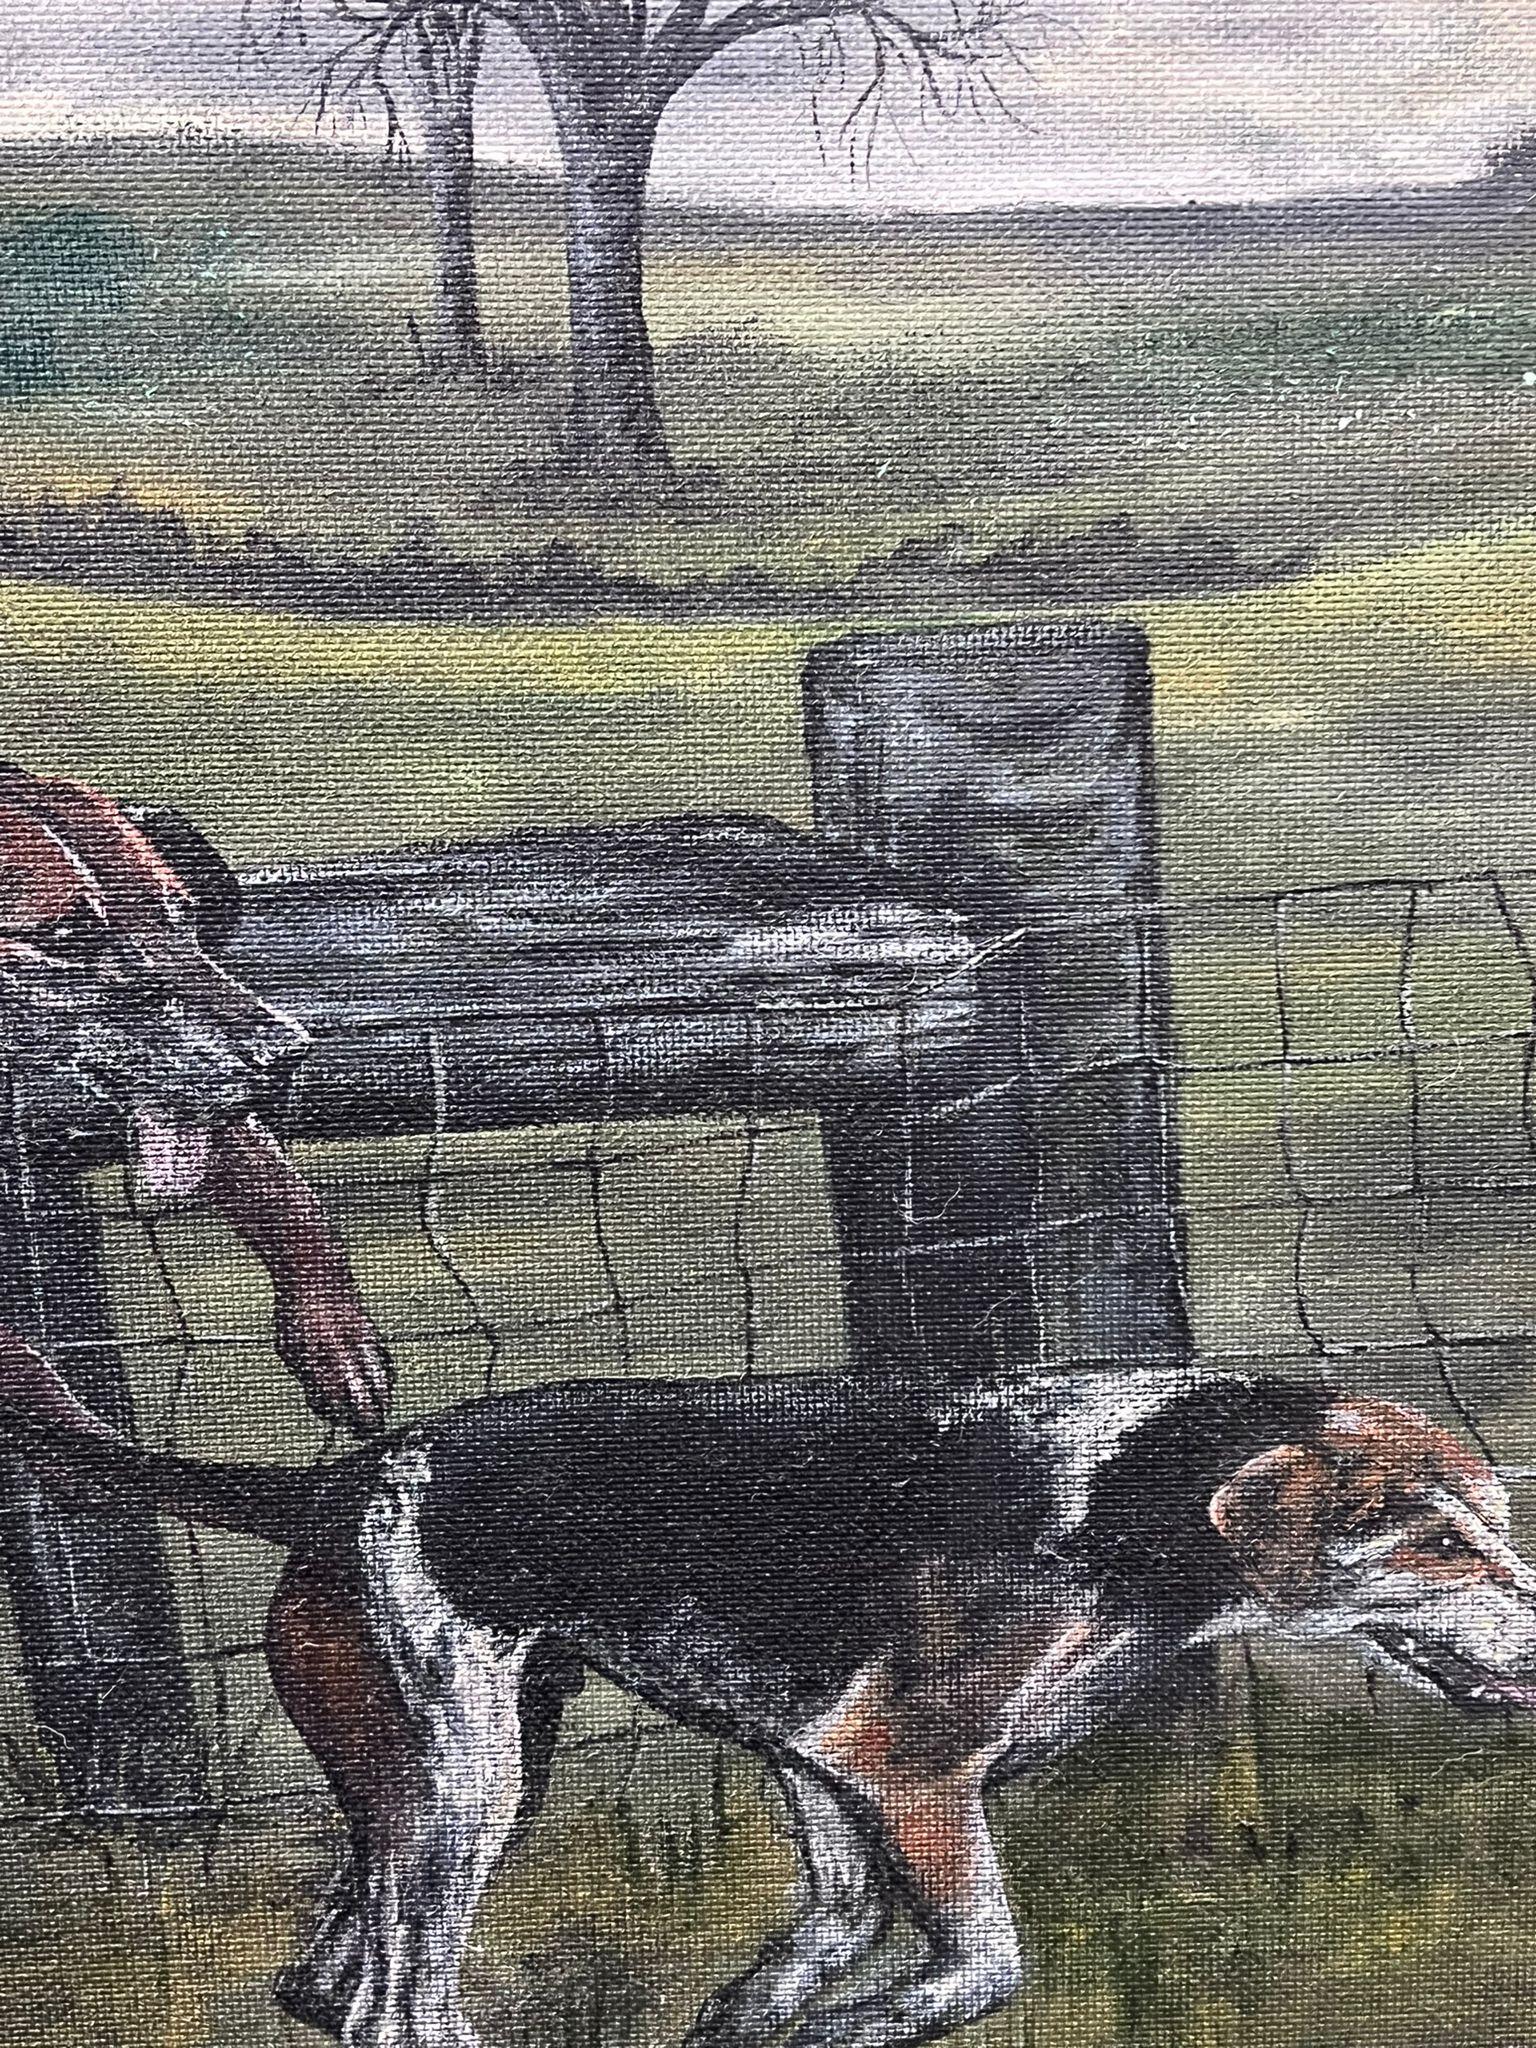 Huge British Sporting Oil Painting Hunting Hounds in Full Pursuit over Fence For Sale 6